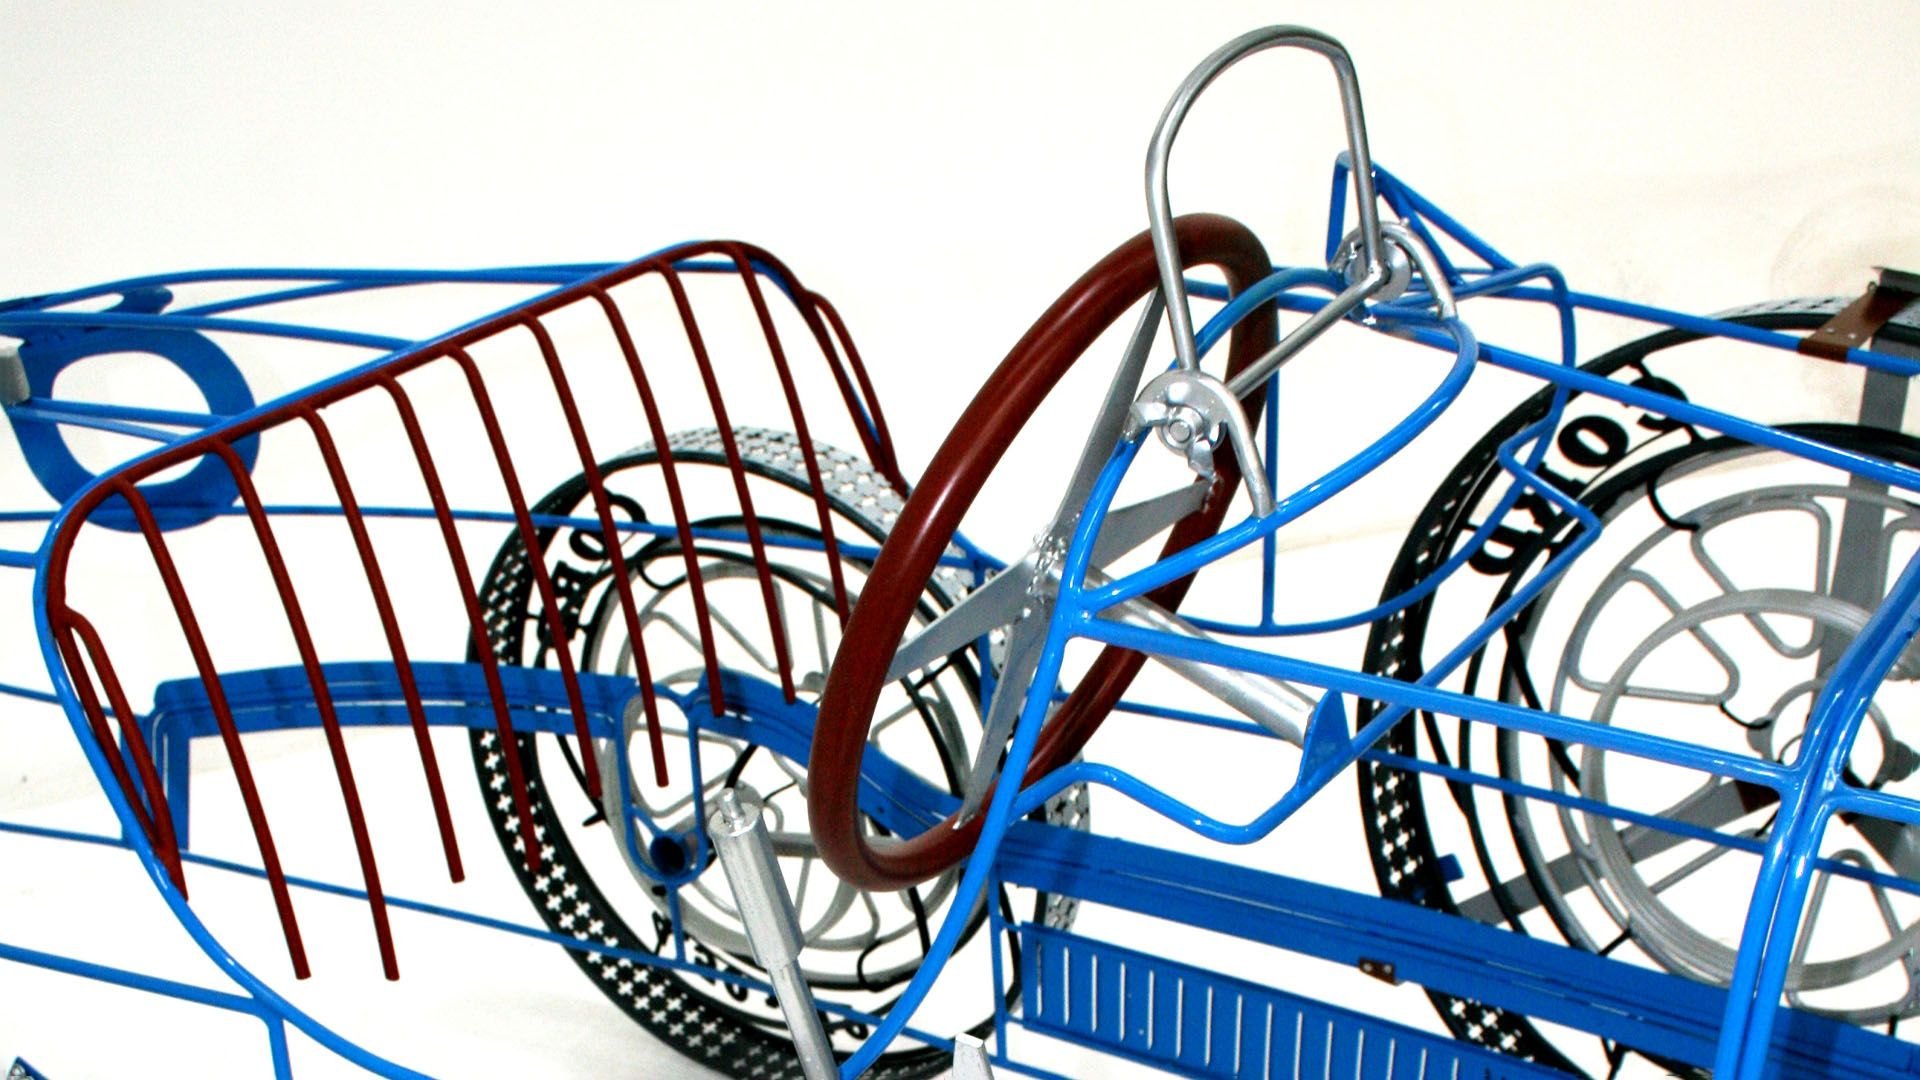 Broad Arrow Auctions | Bugatti Type 35 Full Scale Wire Sculpture